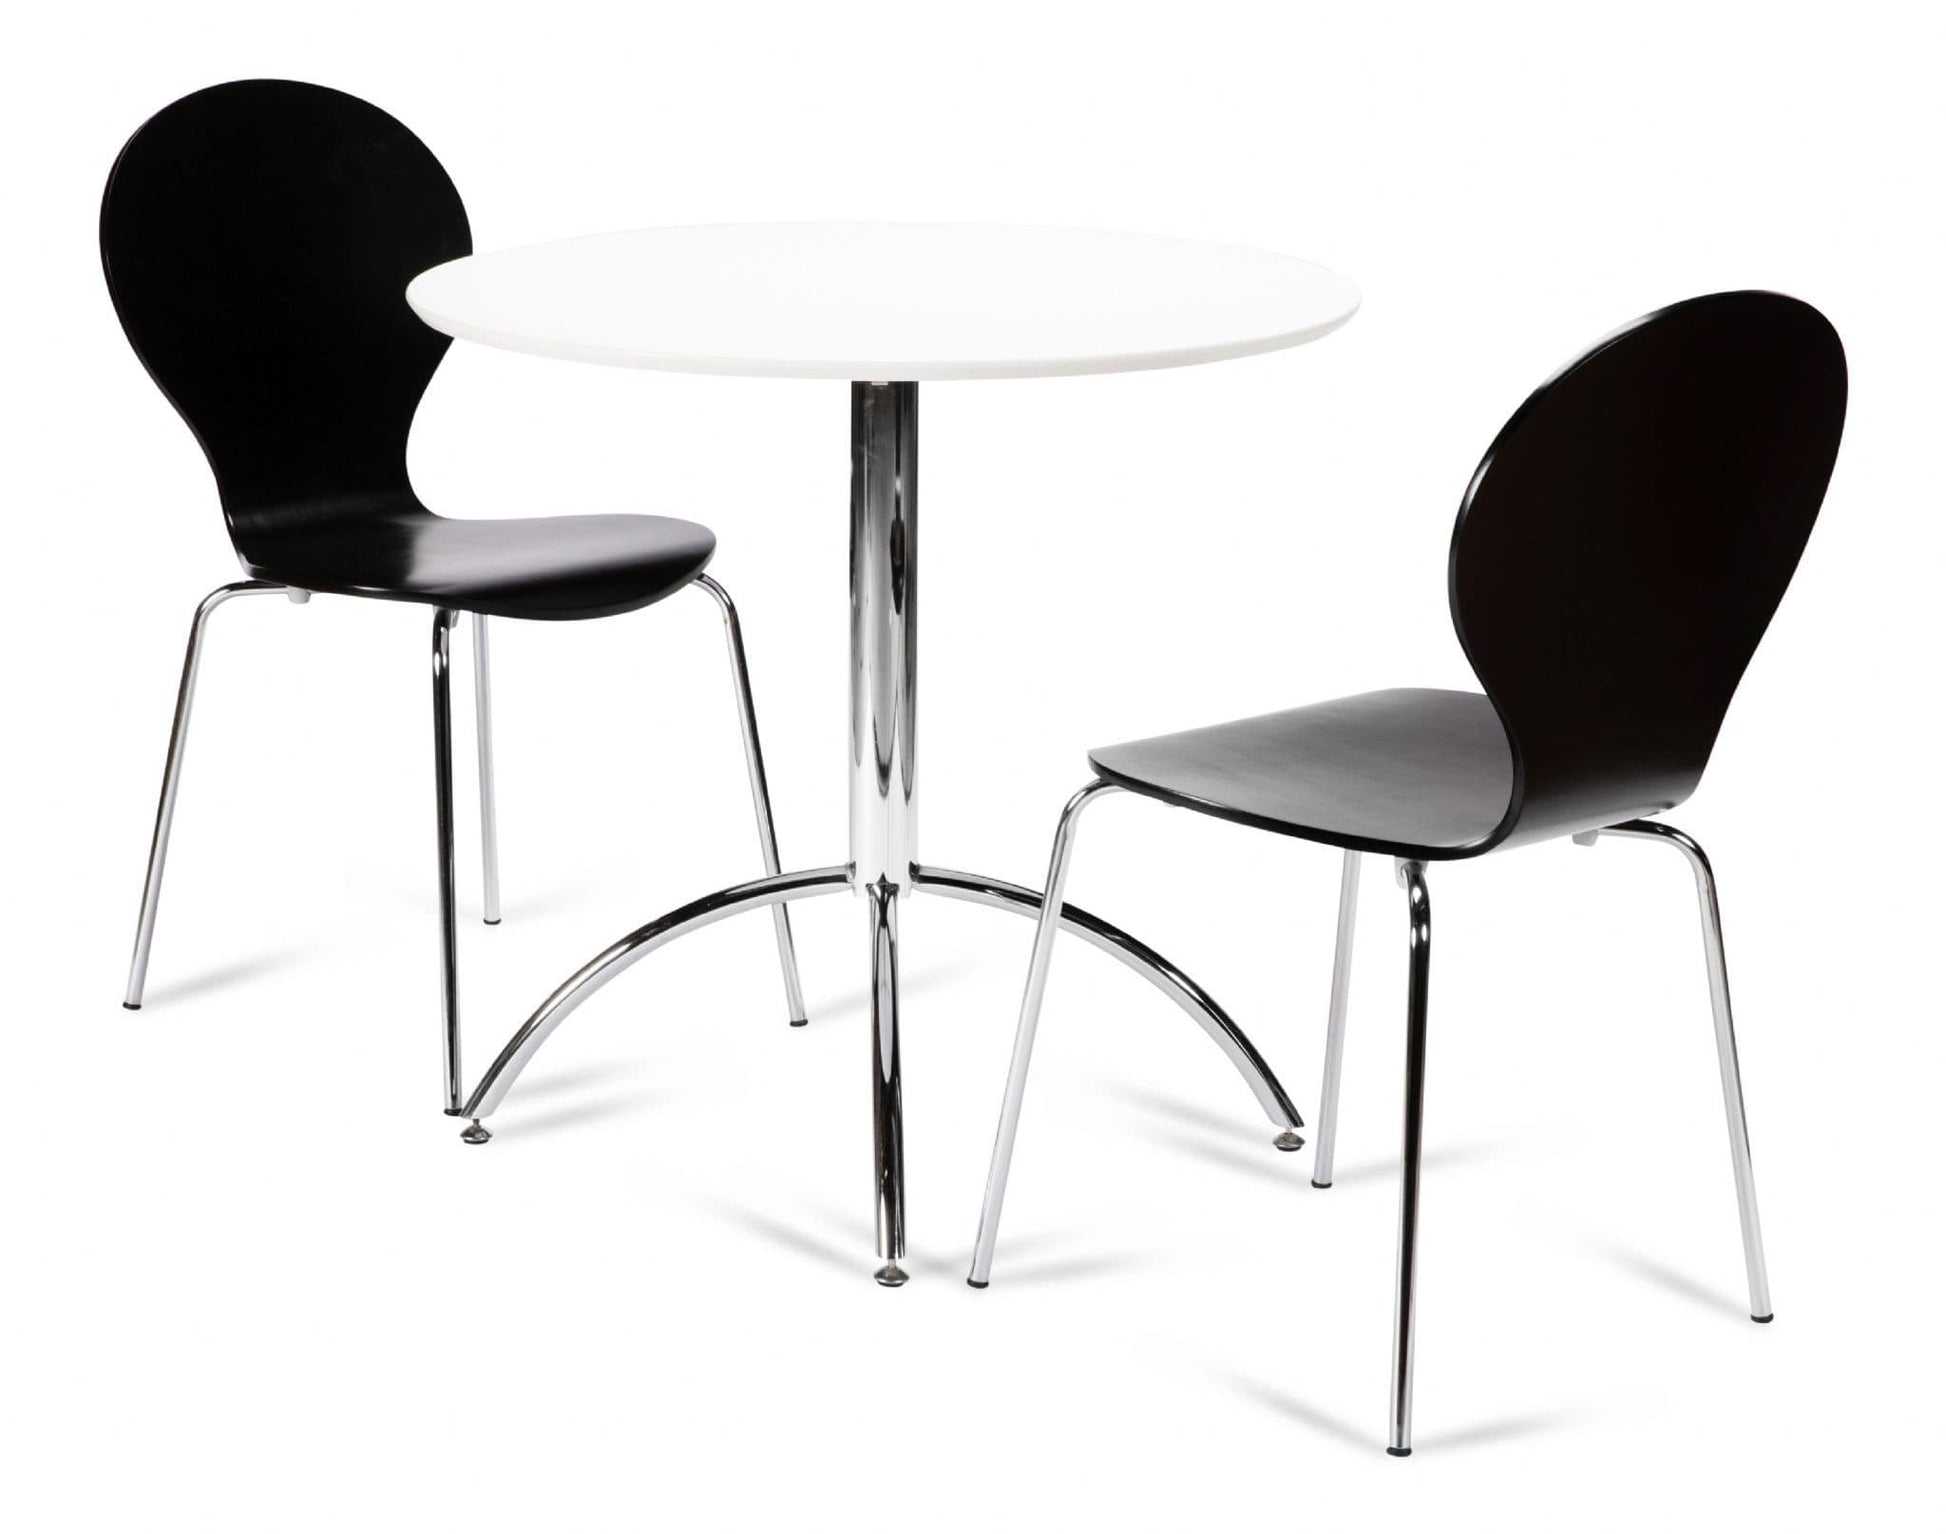 Kimberley Dining Set White Table & 2 Black Chairs